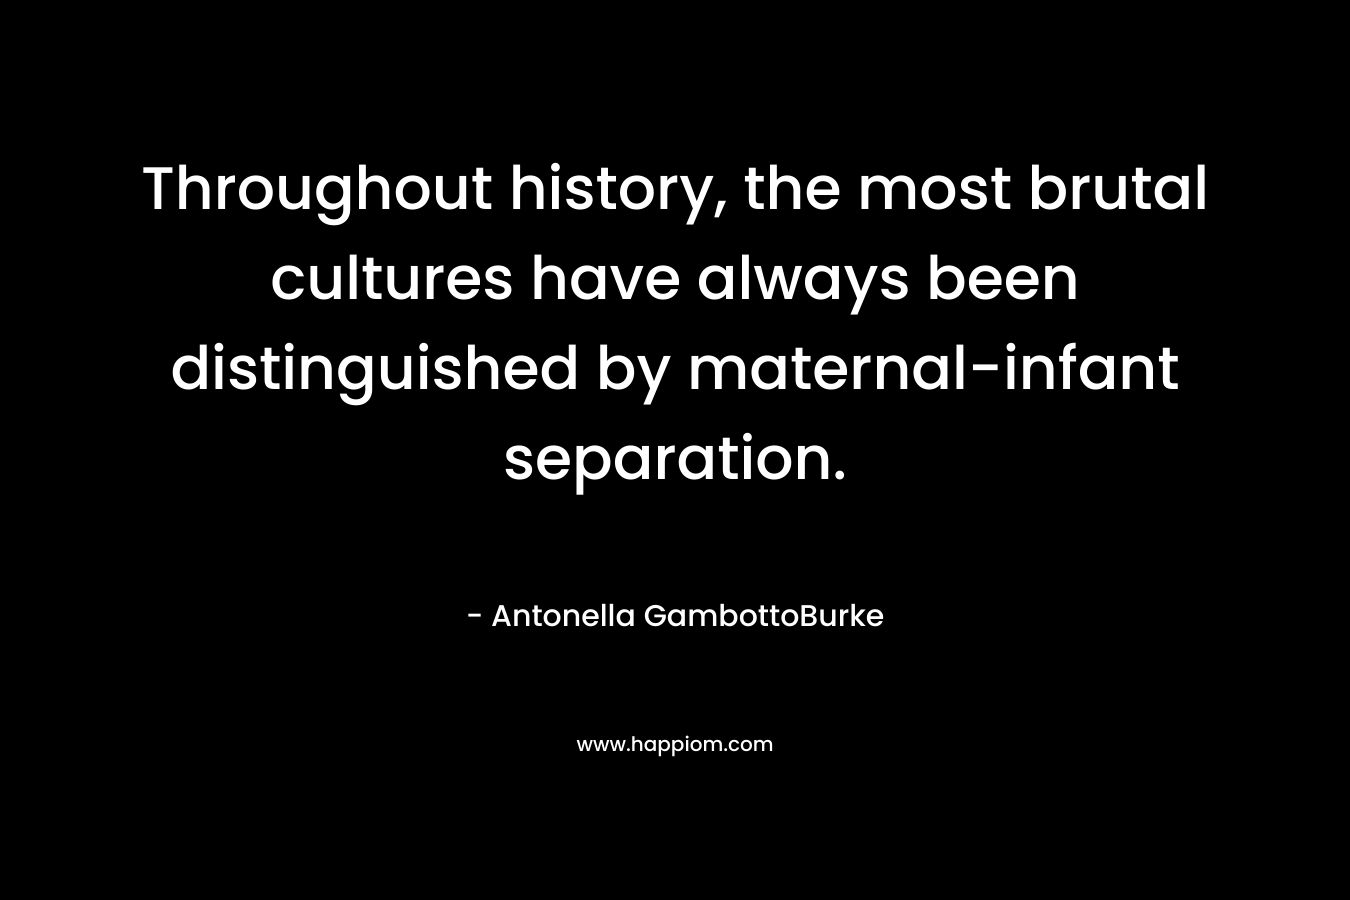 Throughout history, the most brutal cultures have always been distinguished by maternal-infant separation. – Antonella GambottoBurke